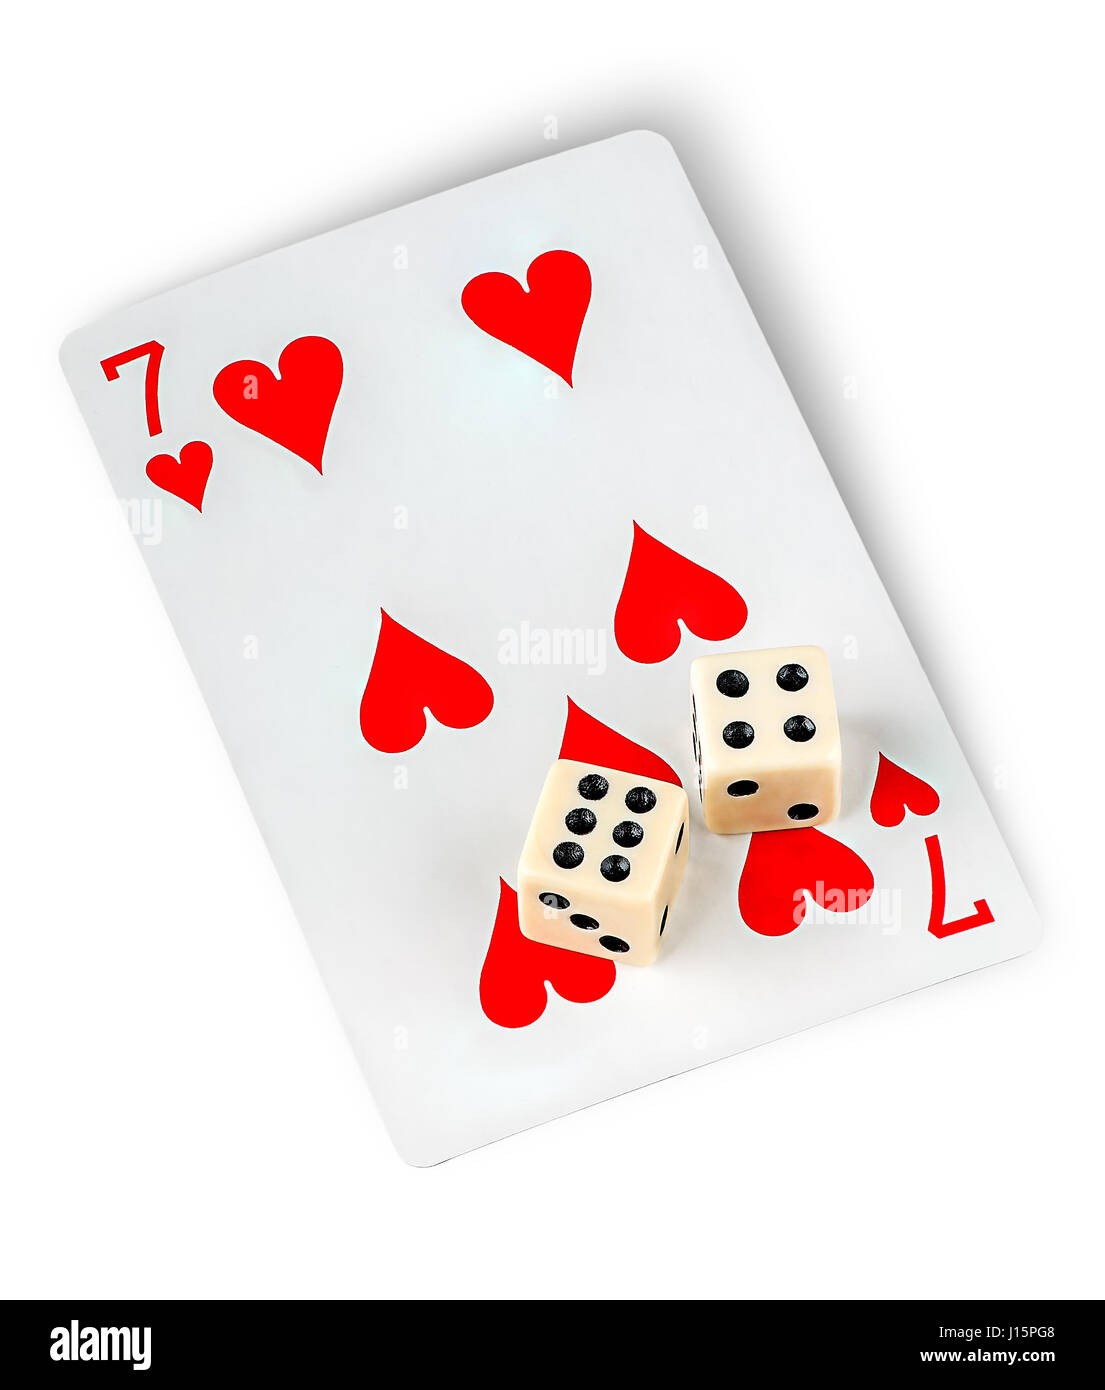 Playing card and dices Stock Photo